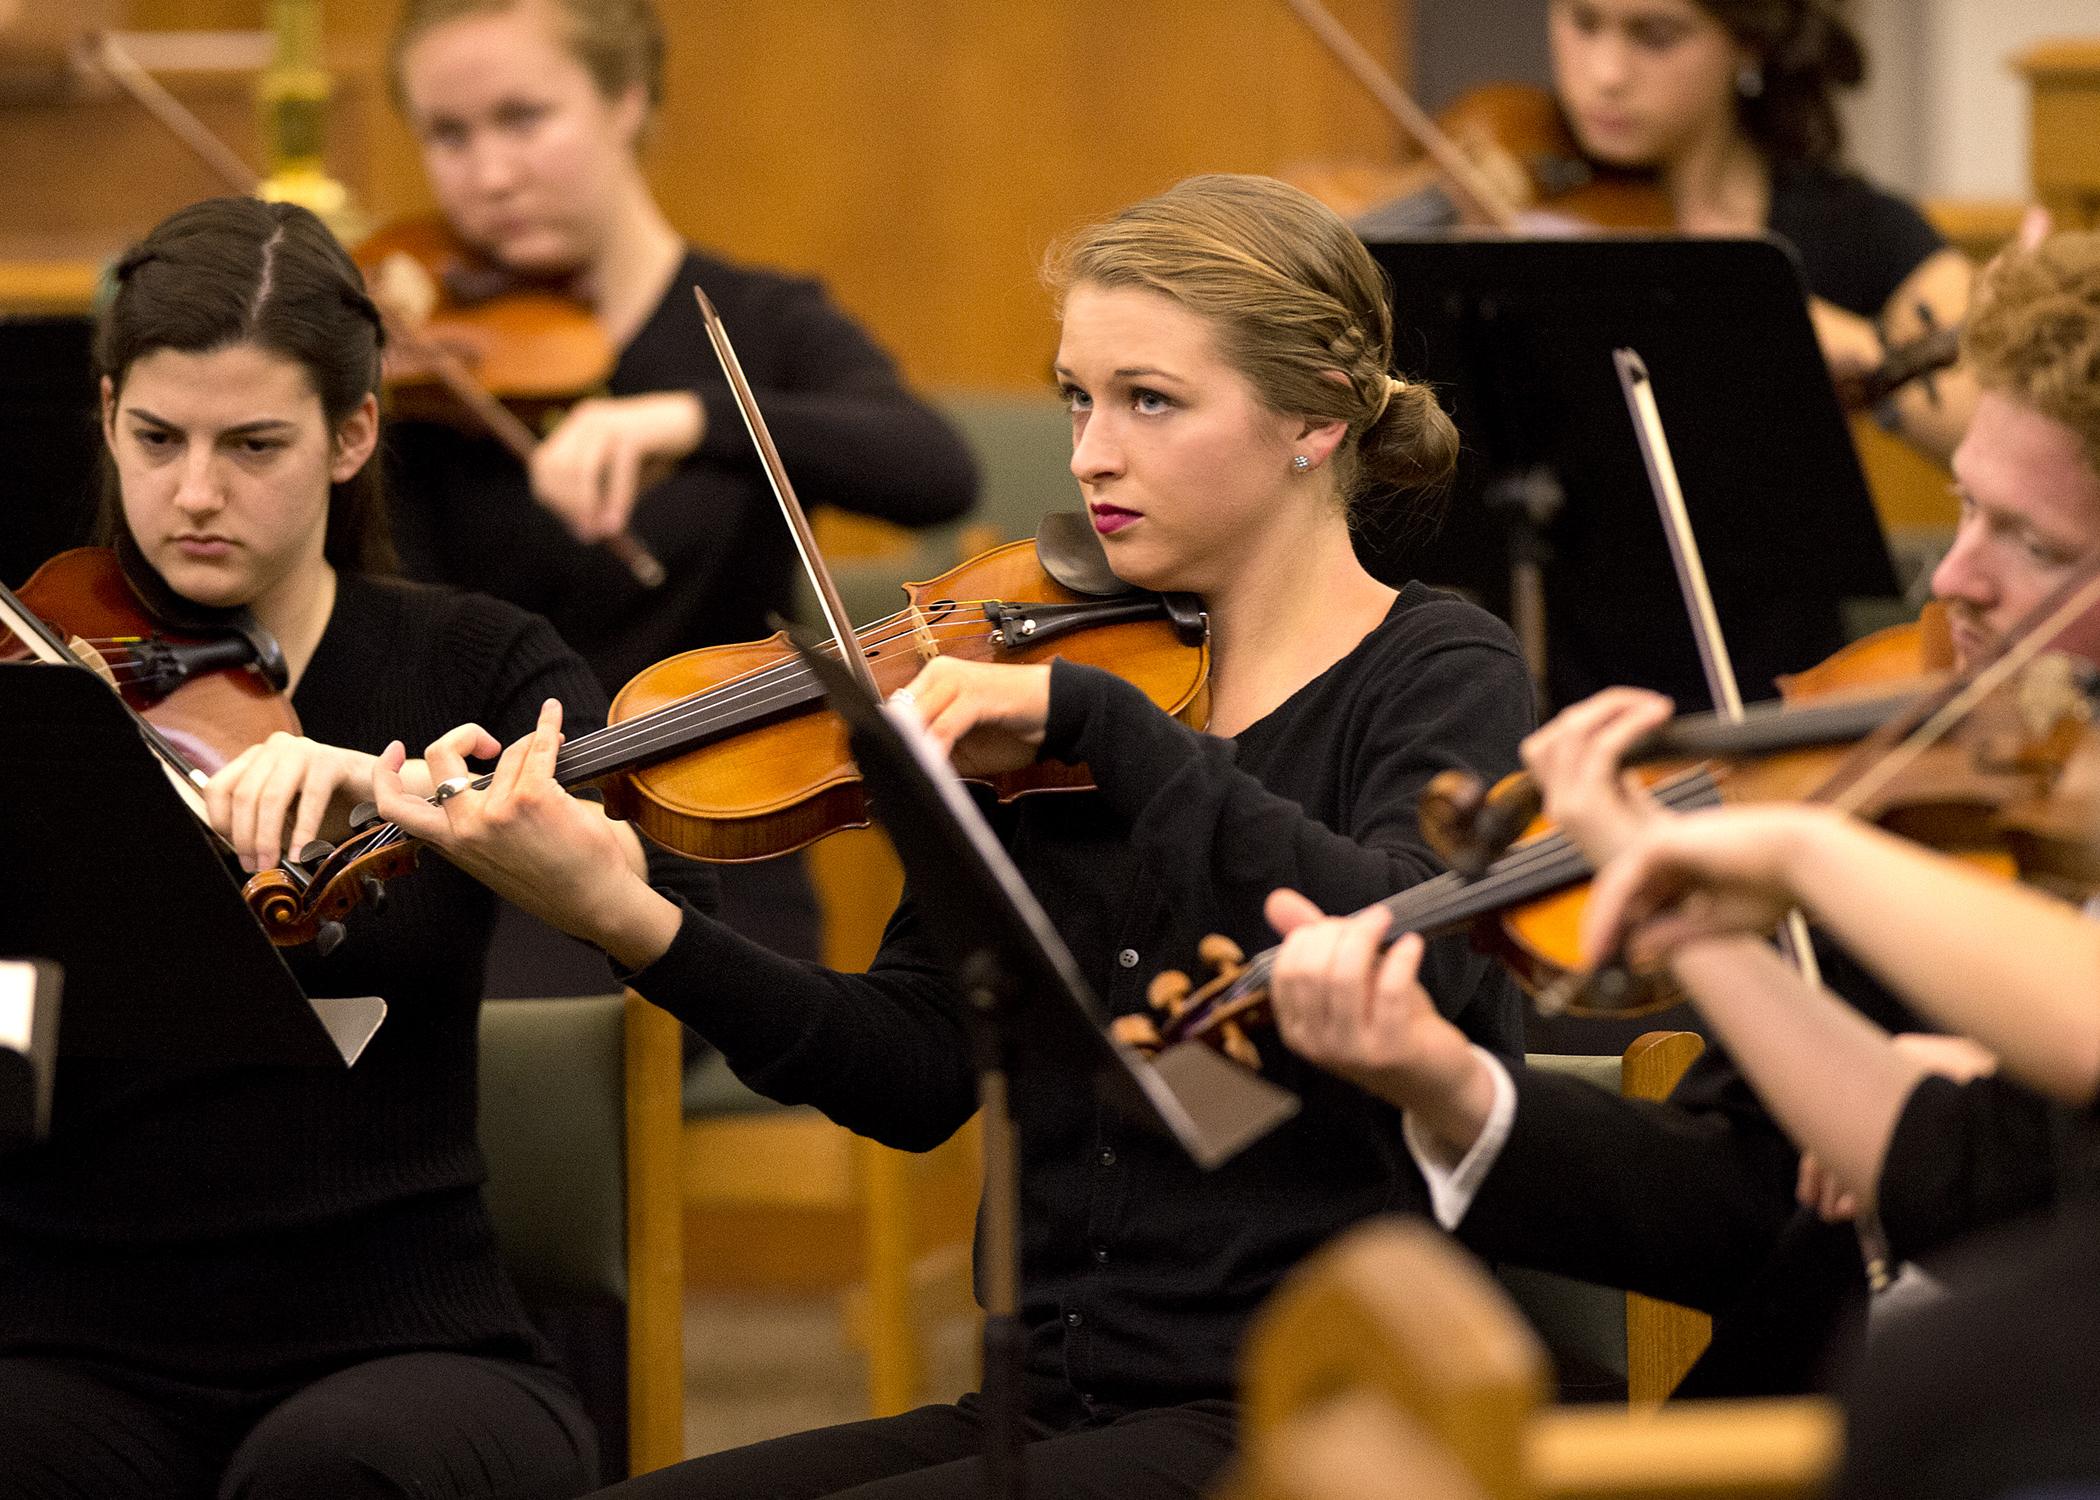 University of Mount Union students performing in Repertory Strings